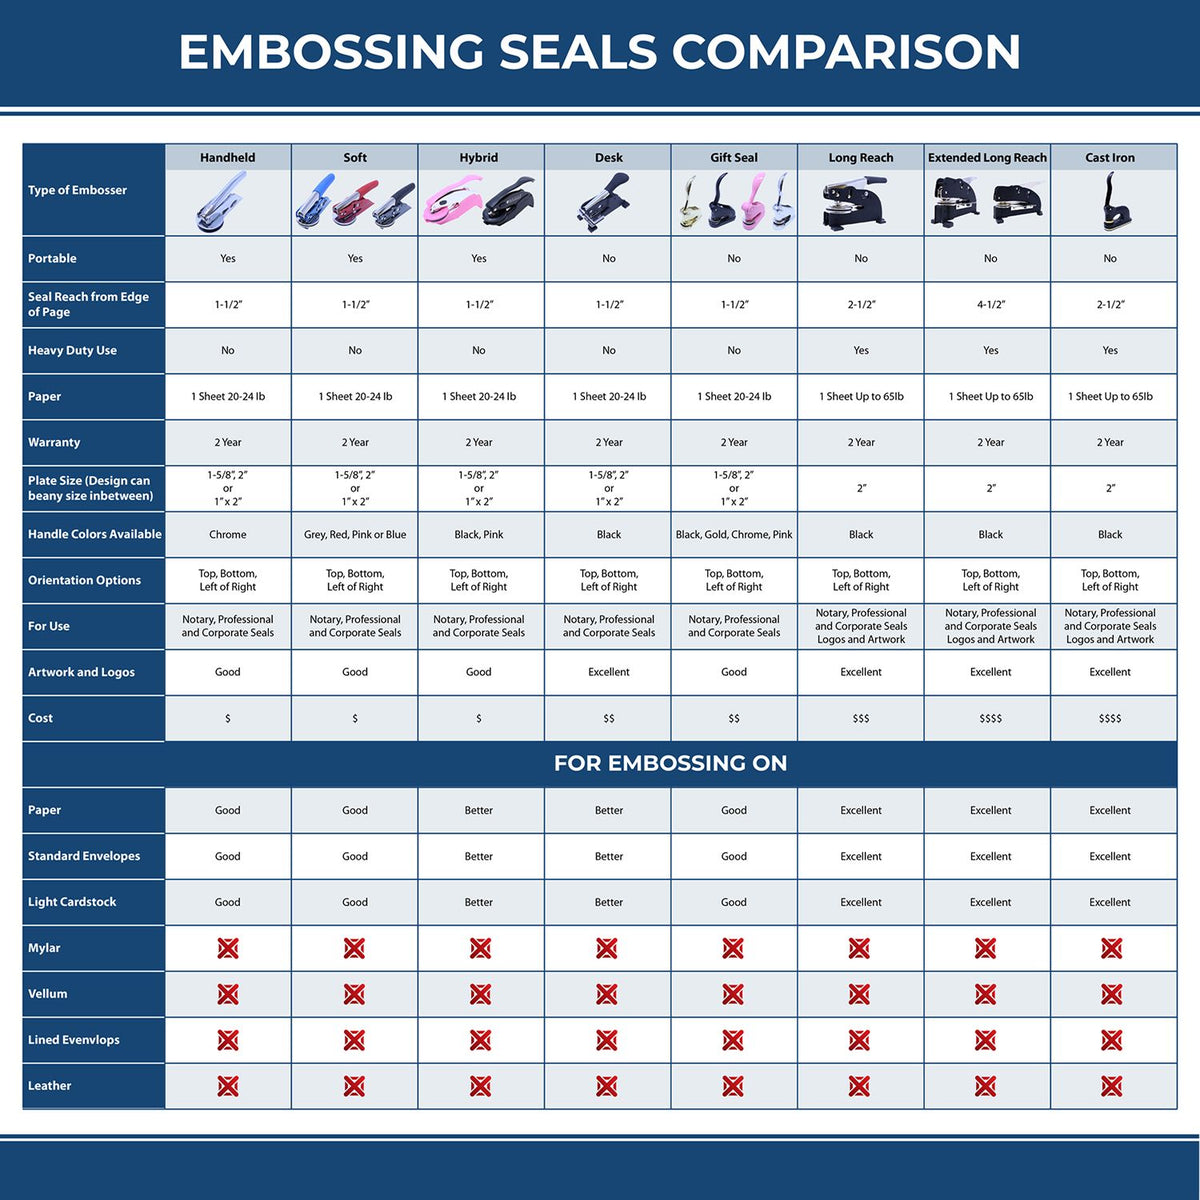 A comparison chart for the different types of mount models available for the South Dakota Desk Architect Embossing Seal.